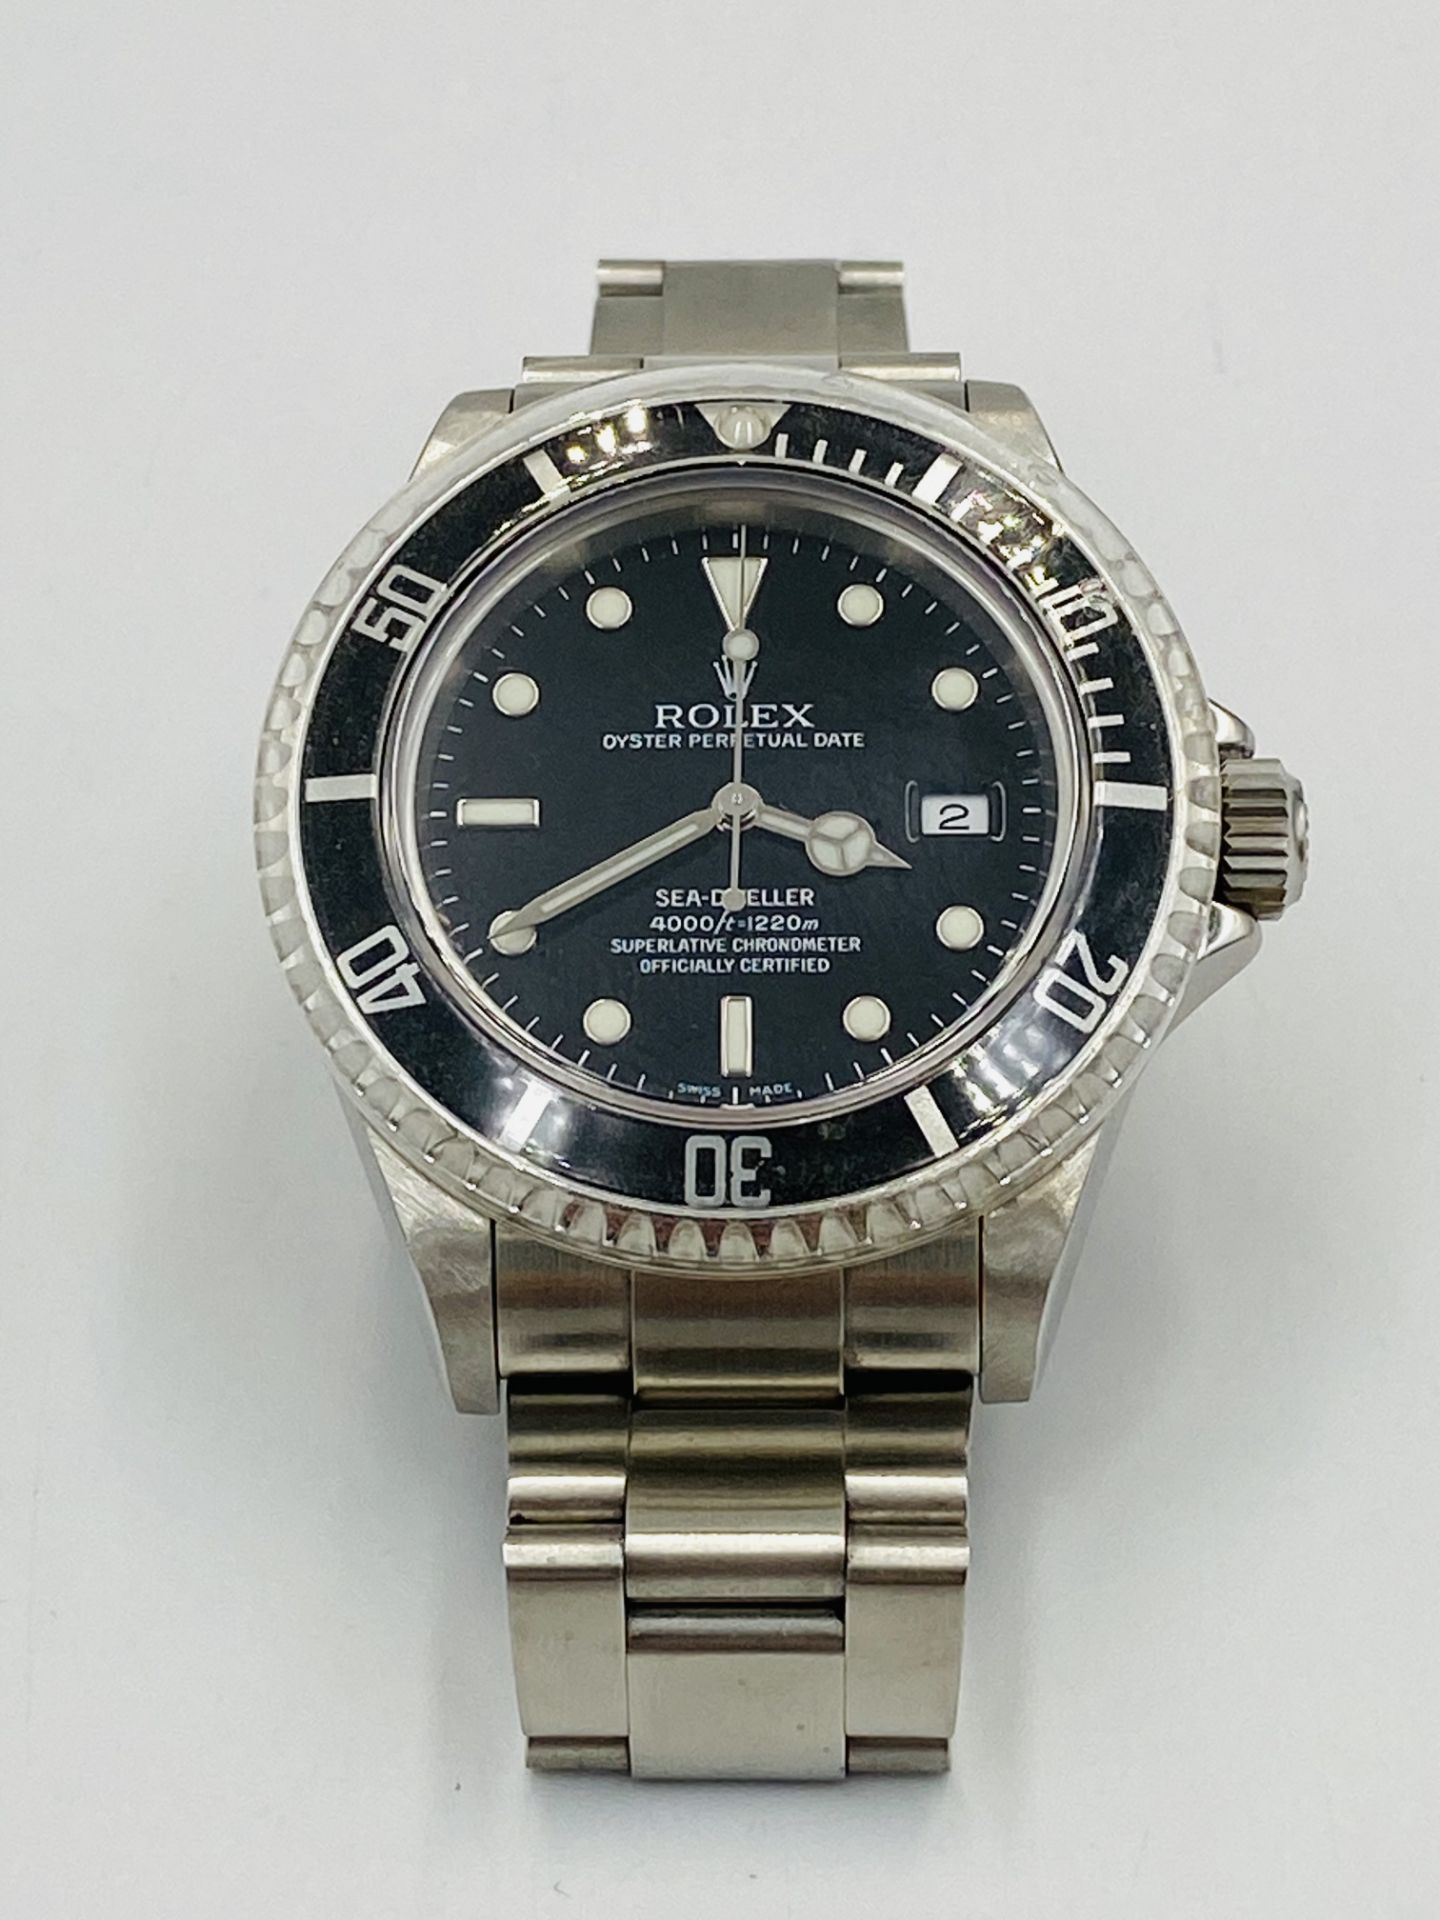 Rolex Oyster Perpetual Date Sea Dweller stainless steel wristwatch - Image 4 of 6